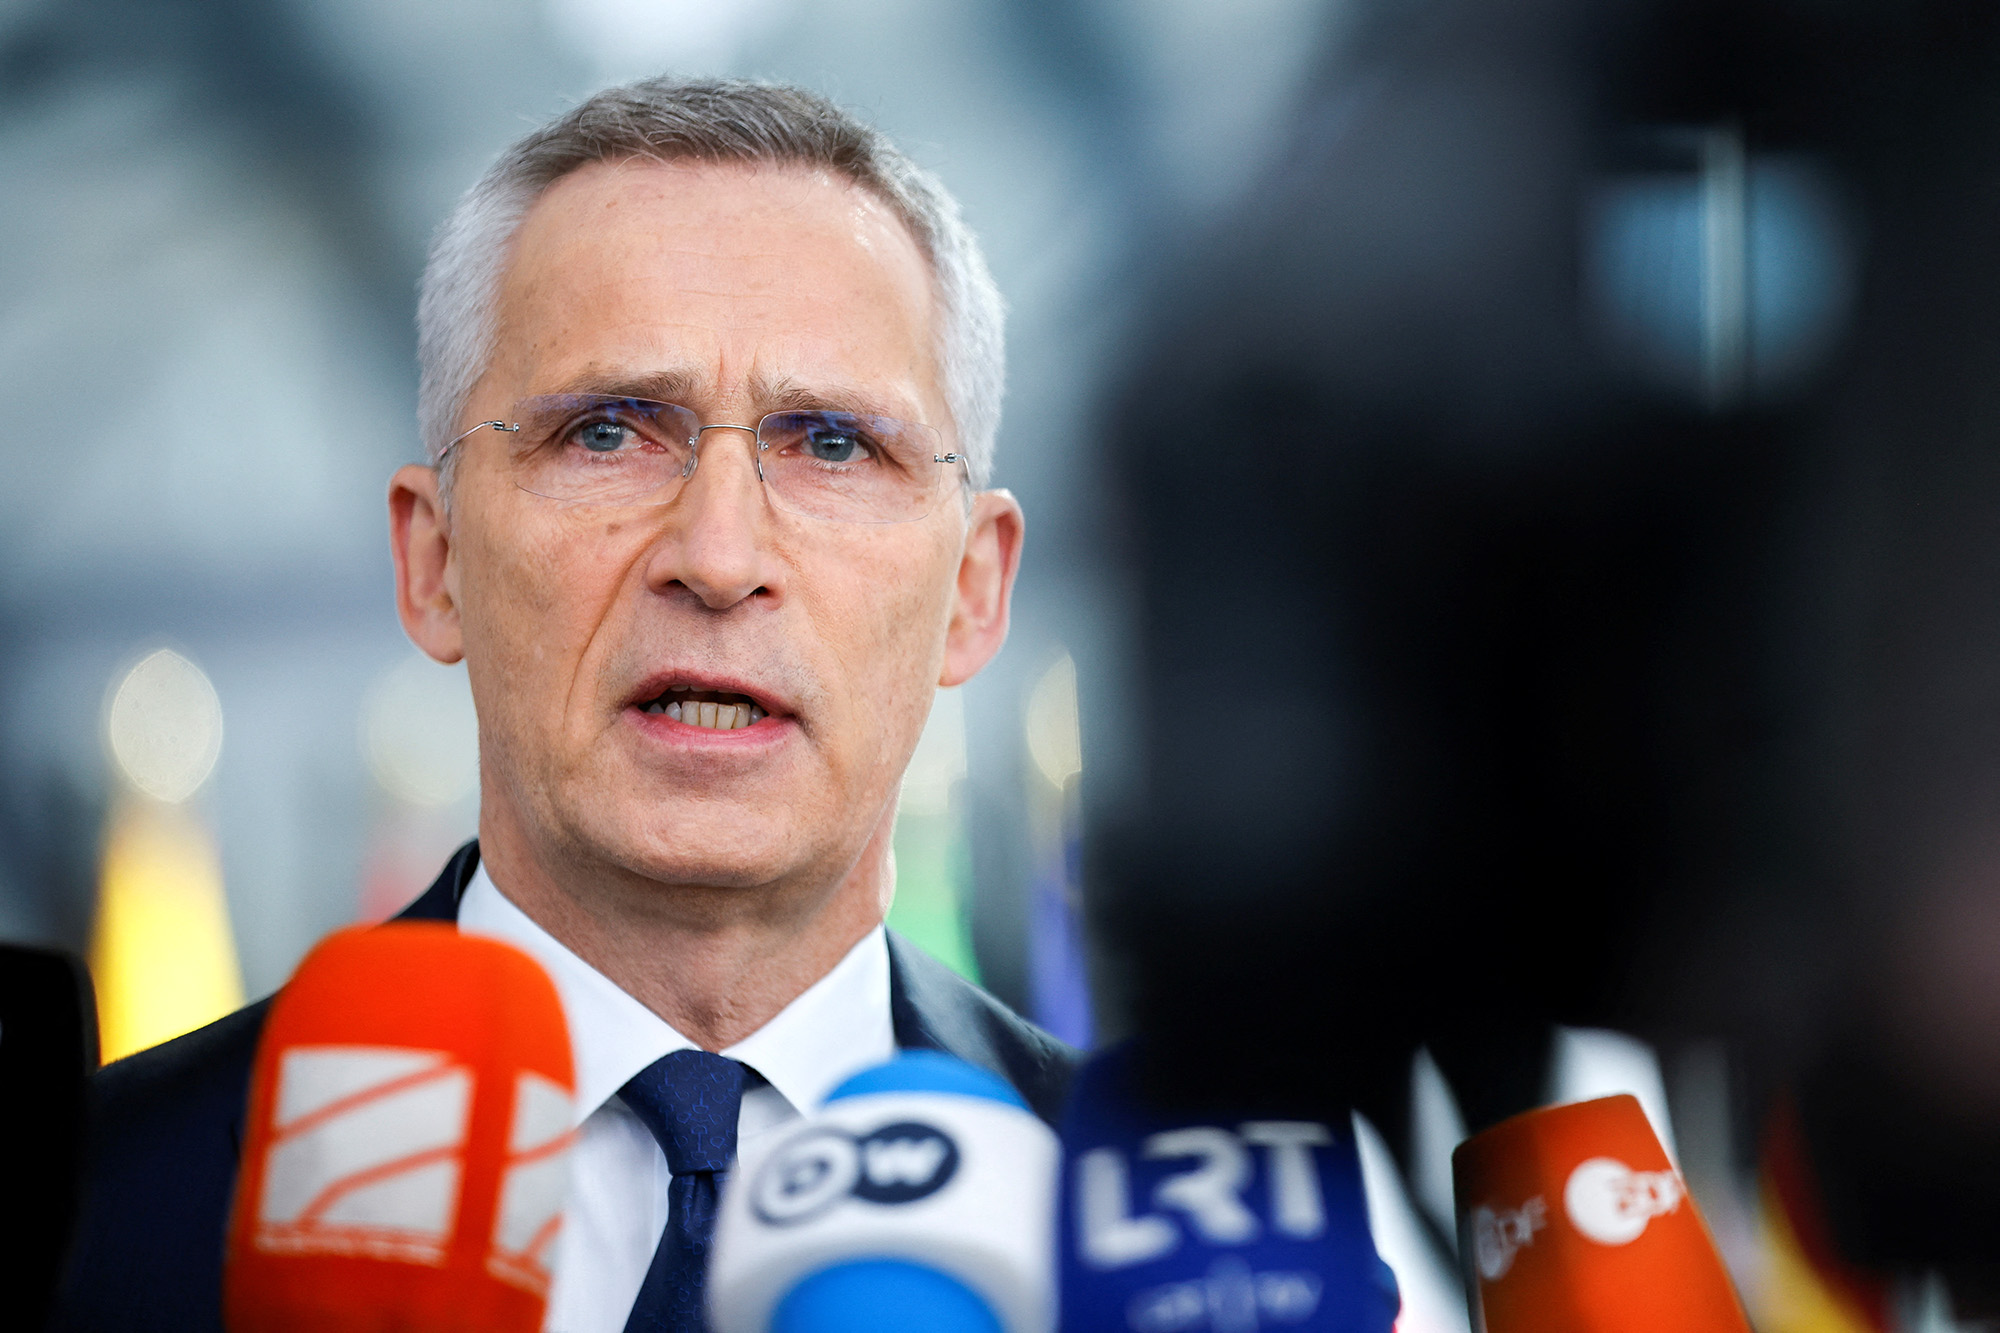 NATO Secretary-General Jens Stoltenberg delivers a statement during the NATO foreign ministers' meeting at the Alliance's headquarters in Brussels, Belgium, on April 4.